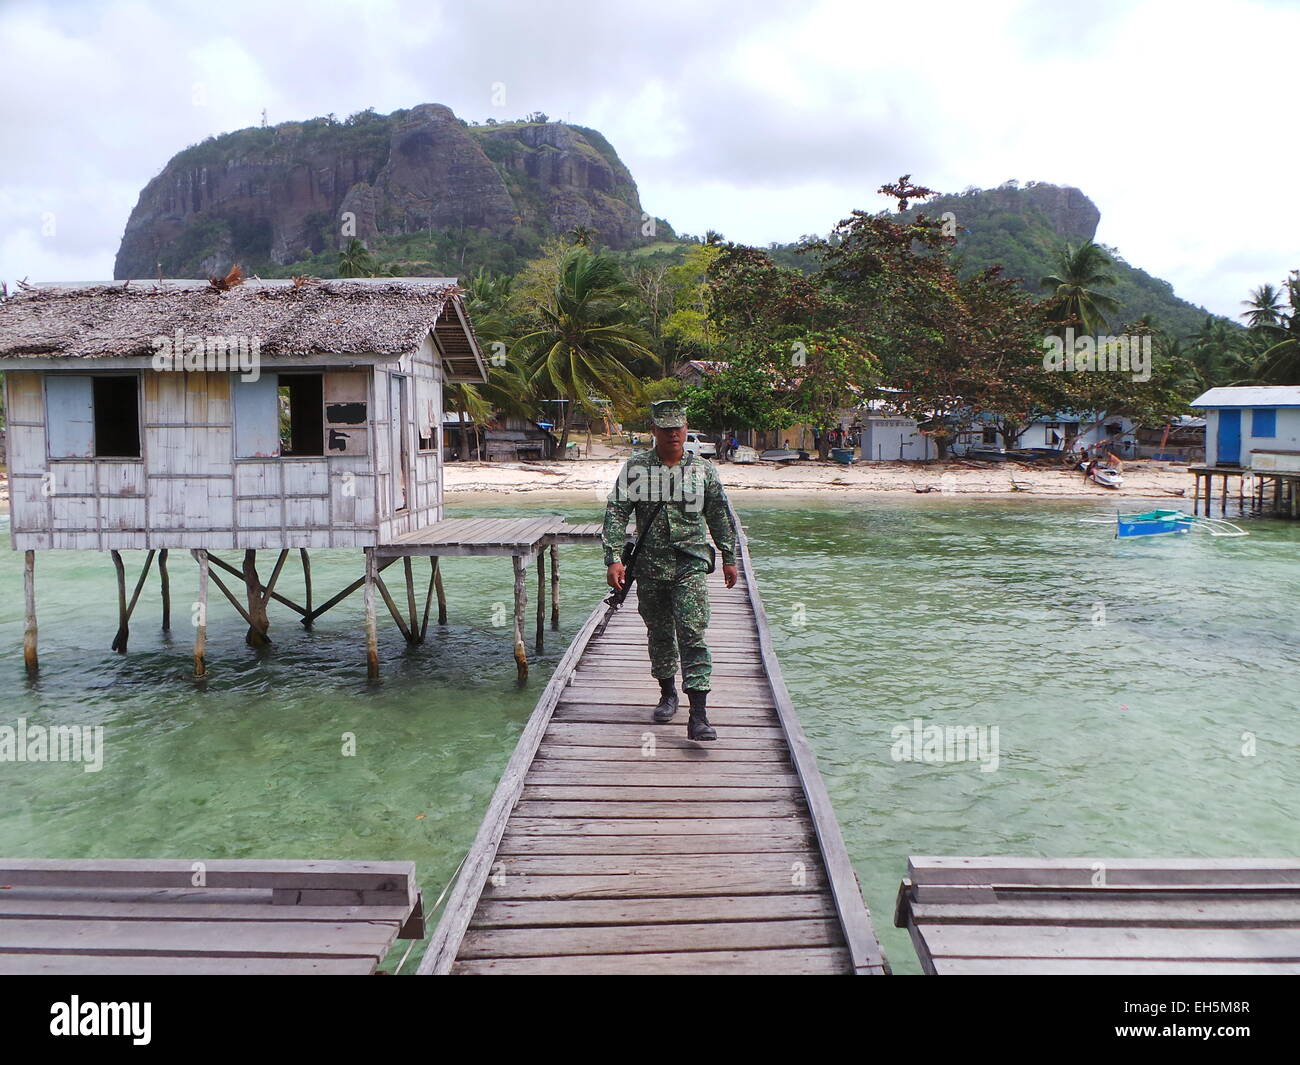 To maintain peace and security in Tawi-Tawi, marines are roving around the island. © Sherbien Dacalanio/Pacific Press/Alamy Live News Stock Photo